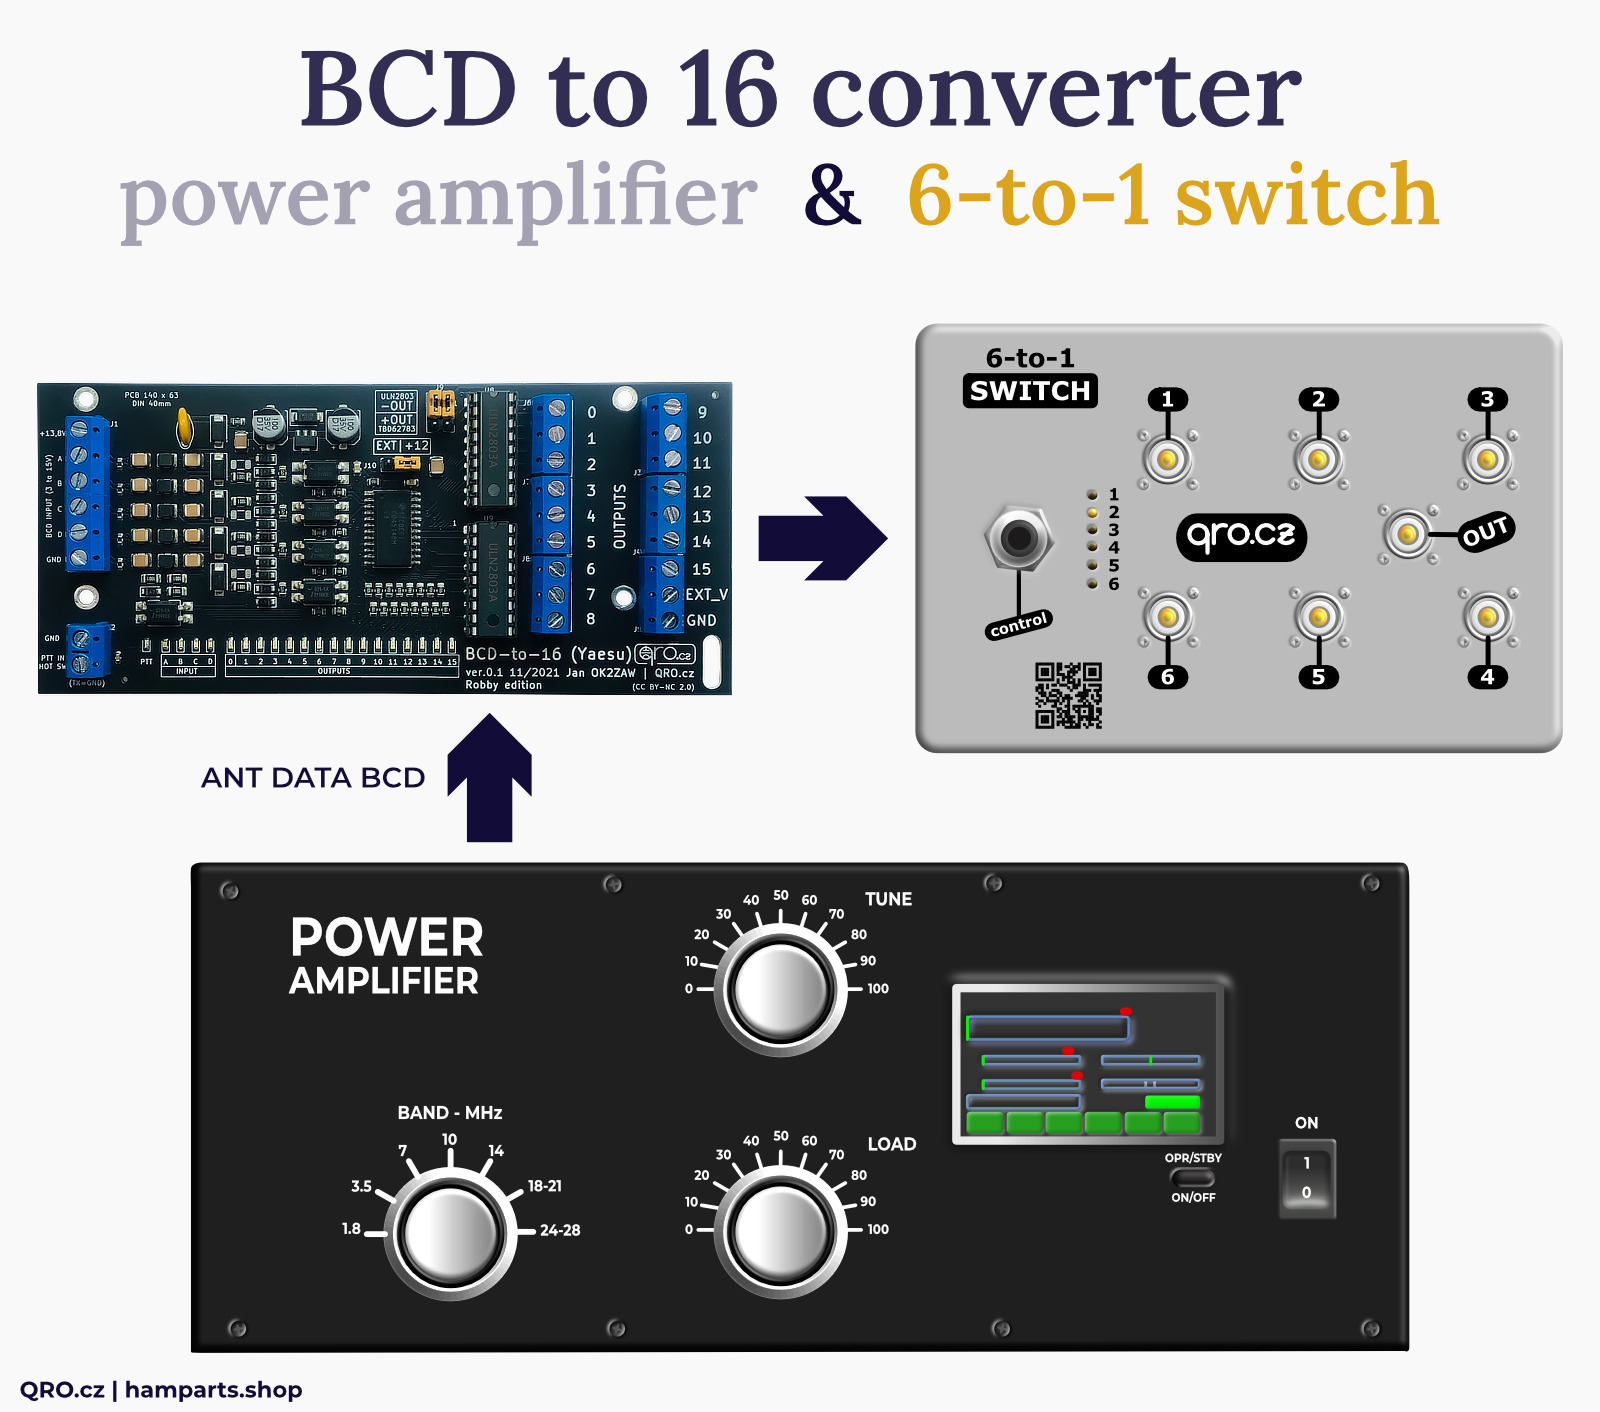 BCD to 16 converter with 6 to 1 antenna switch and power amplifier by qro.cz hamparts.shop